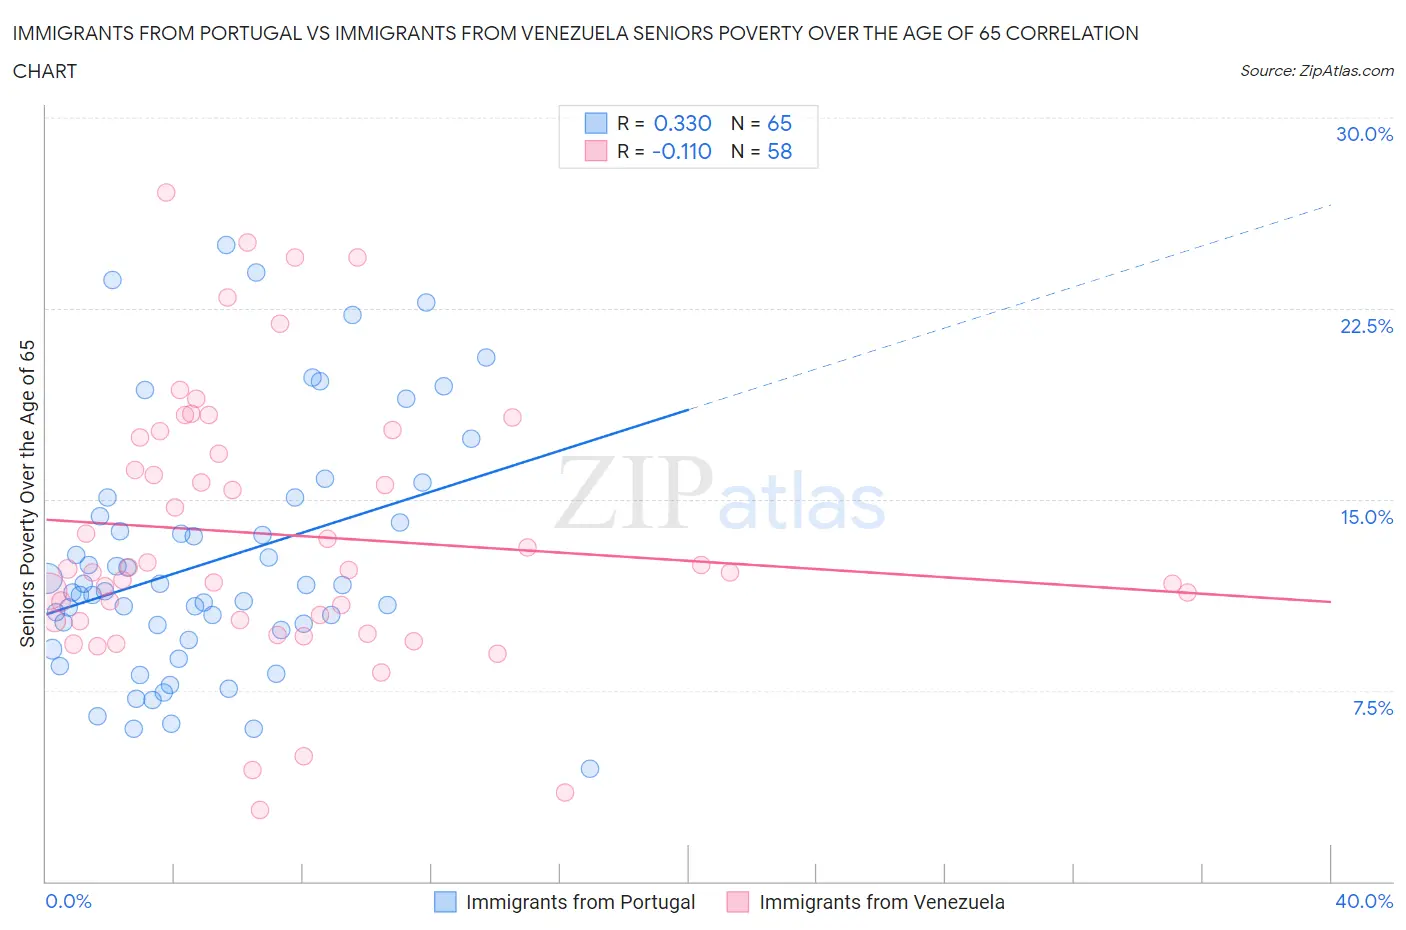 Immigrants from Portugal vs Immigrants from Venezuela Seniors Poverty Over the Age of 65